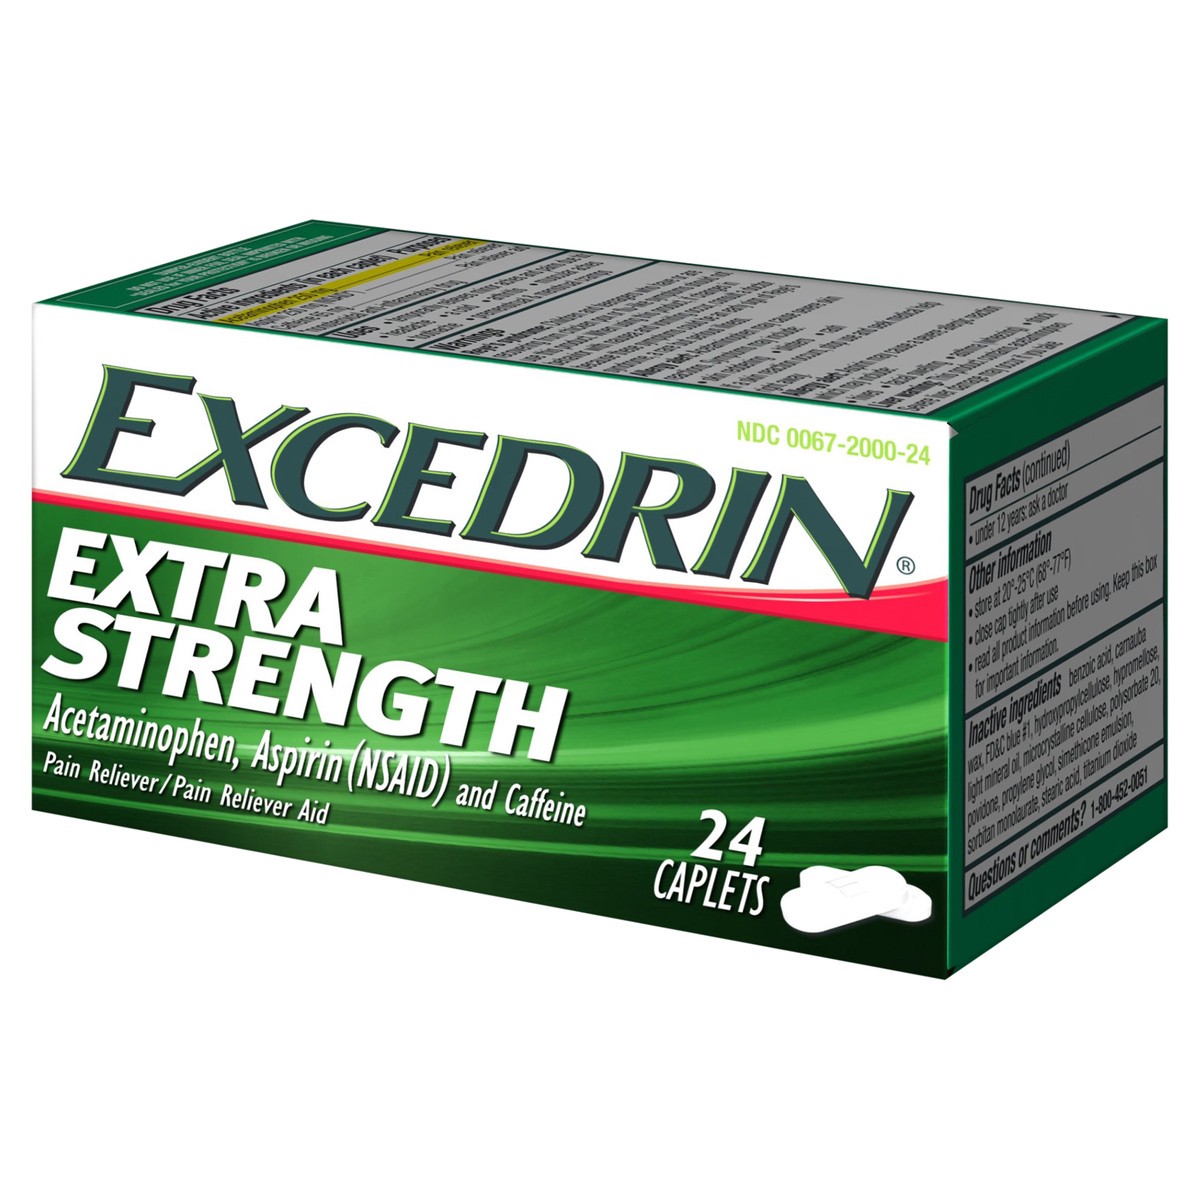 slide 3 of 9, Excedrin Extra Strength Pain Reliever / Pain Reliever Aid Caplets, 24 ct